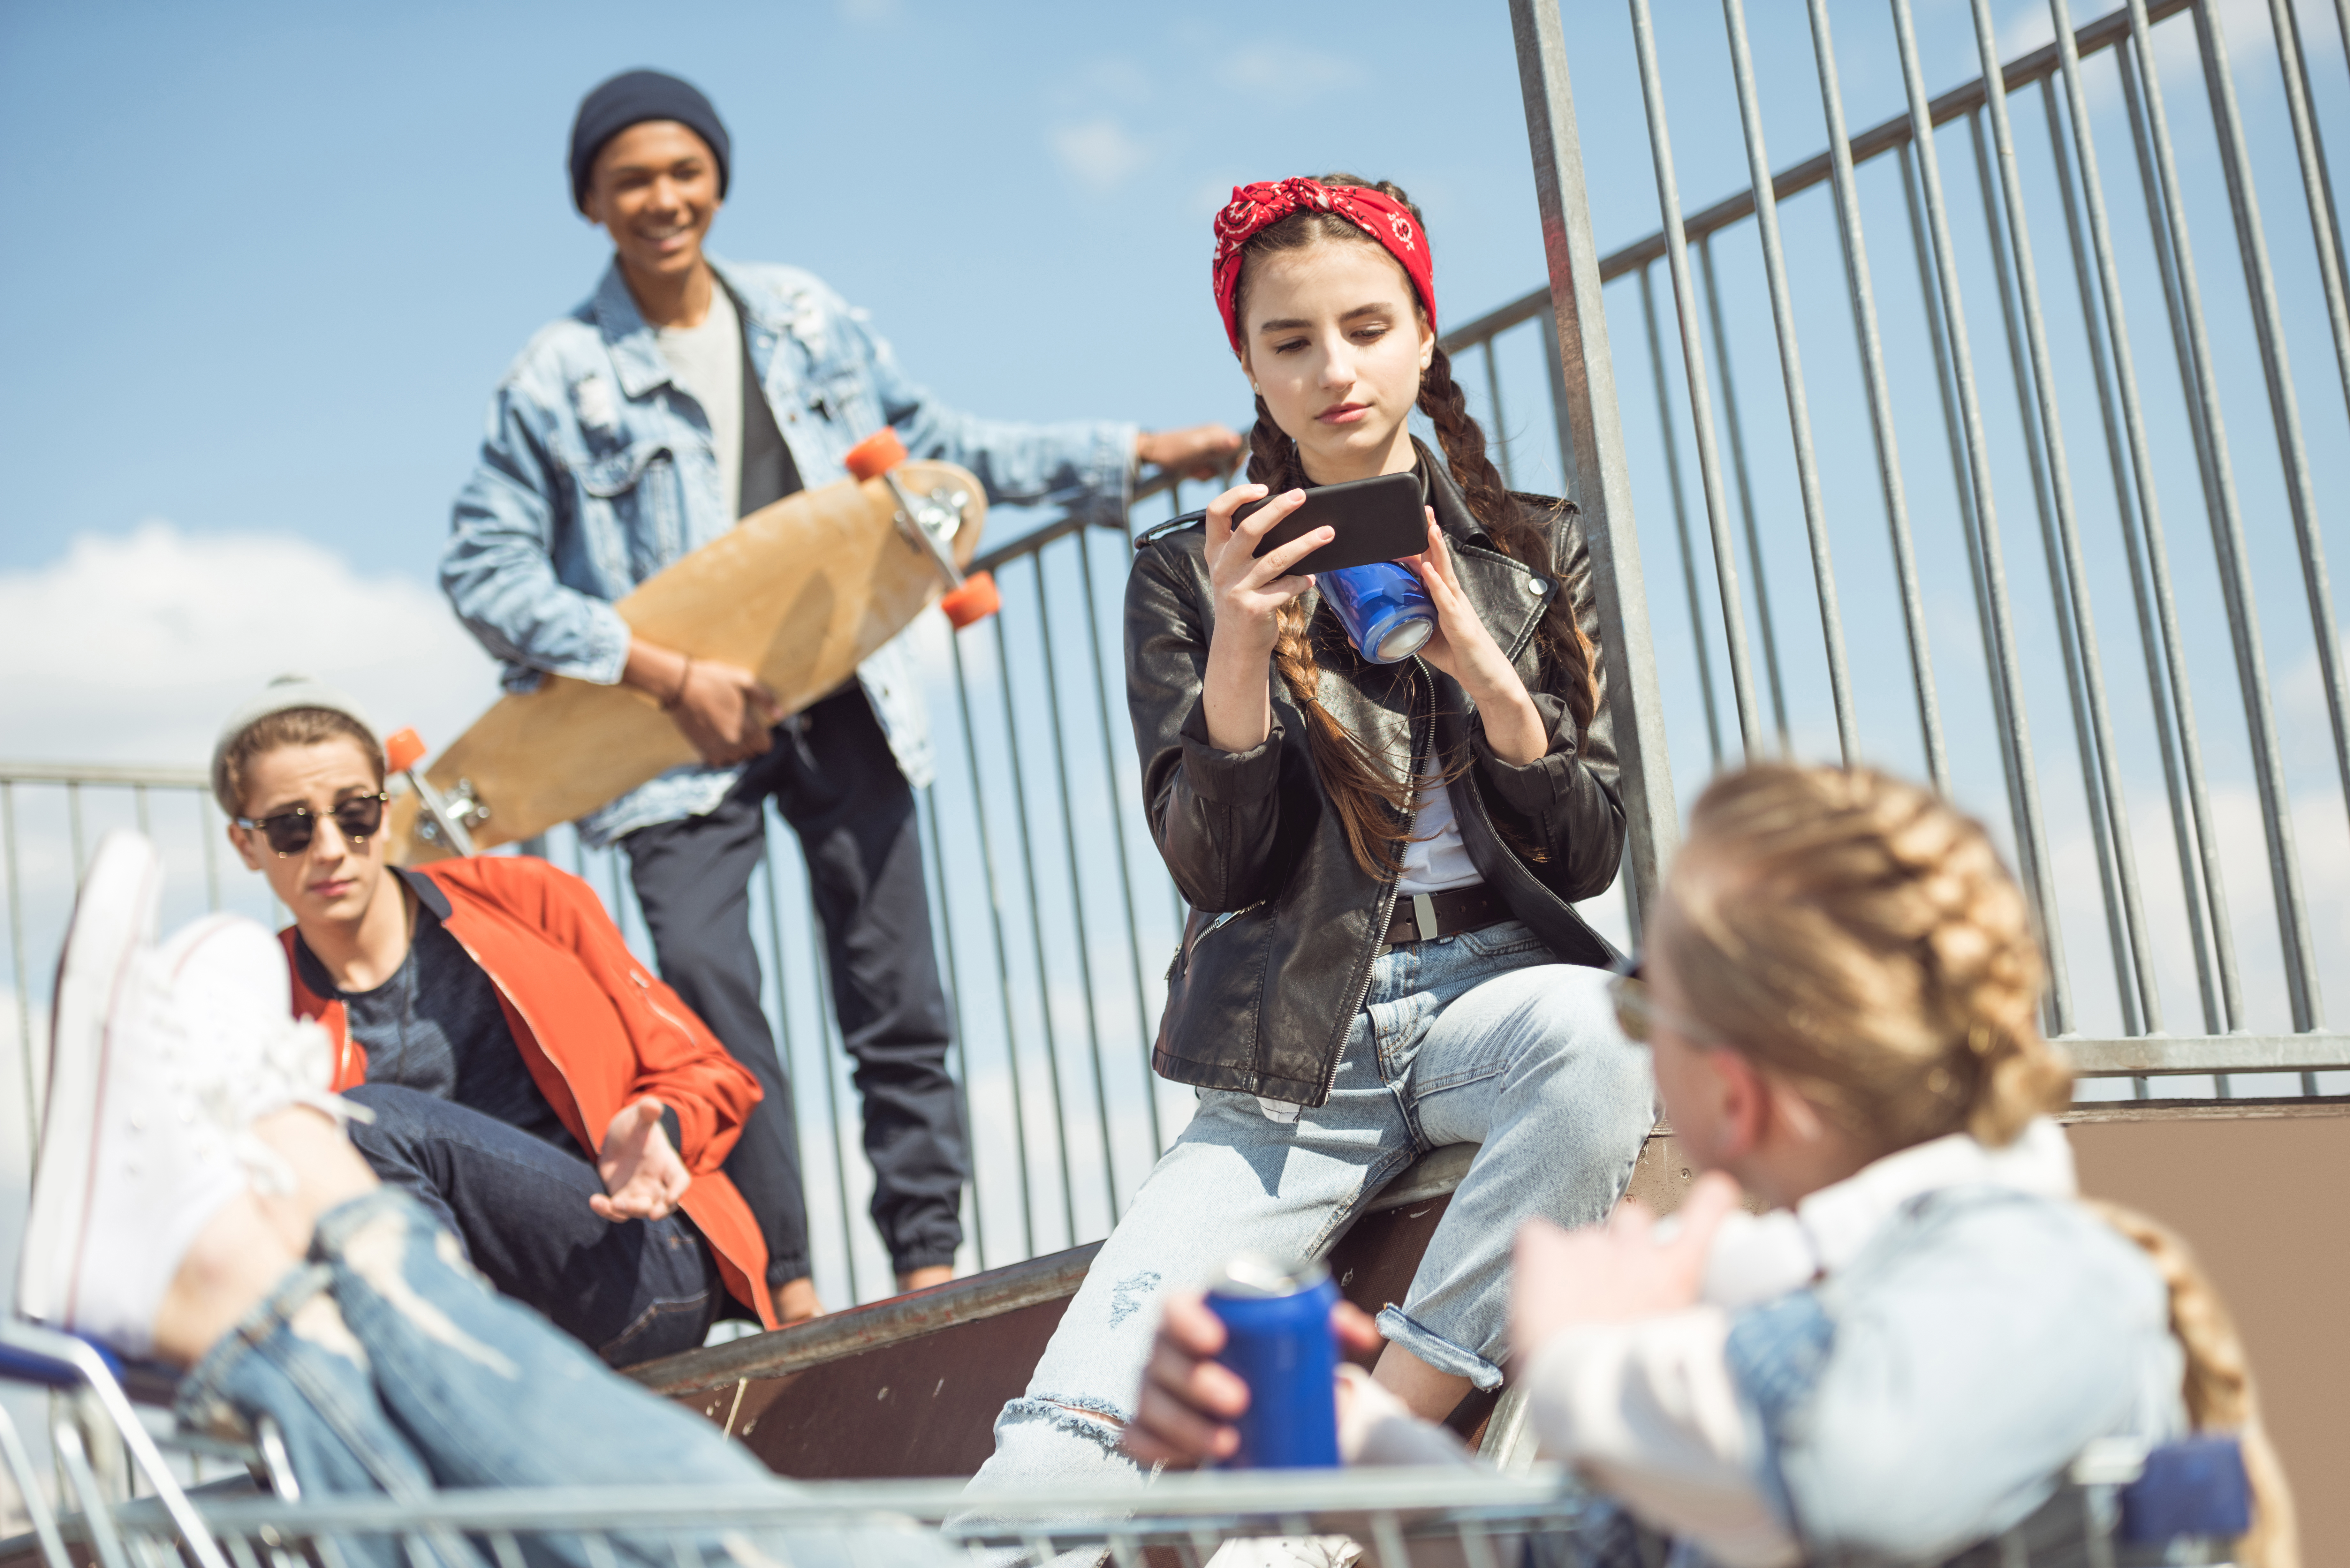 four young people wearing jackets and hats outside. one of the girls is using a smartphone to take a picture of the other girl, who is holding a can